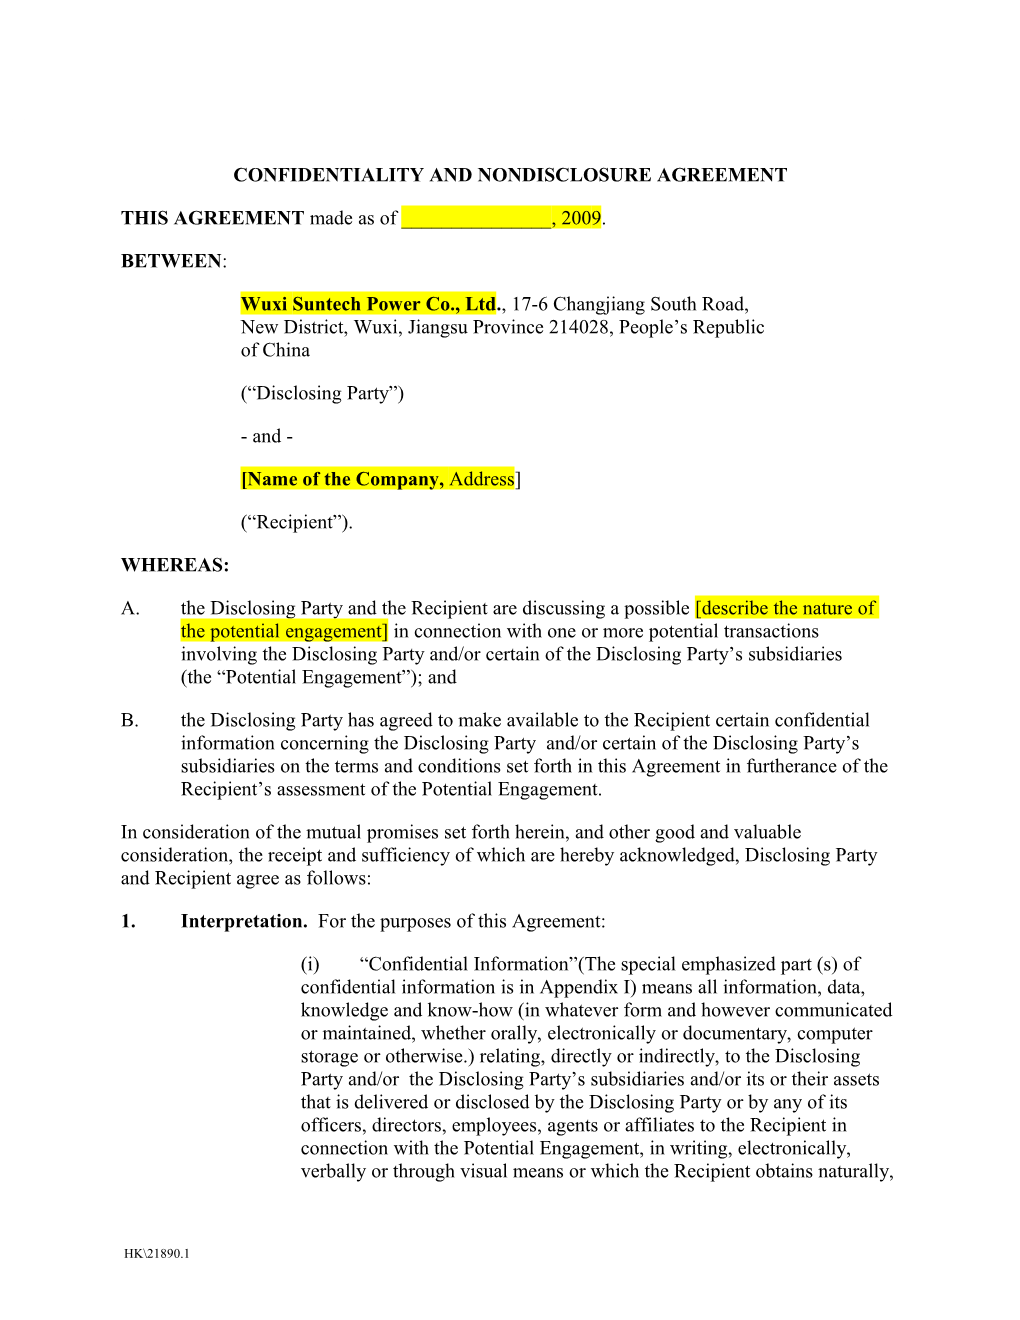 Szhao - Suntech - Confidentiality and Nondisclosure Agreement